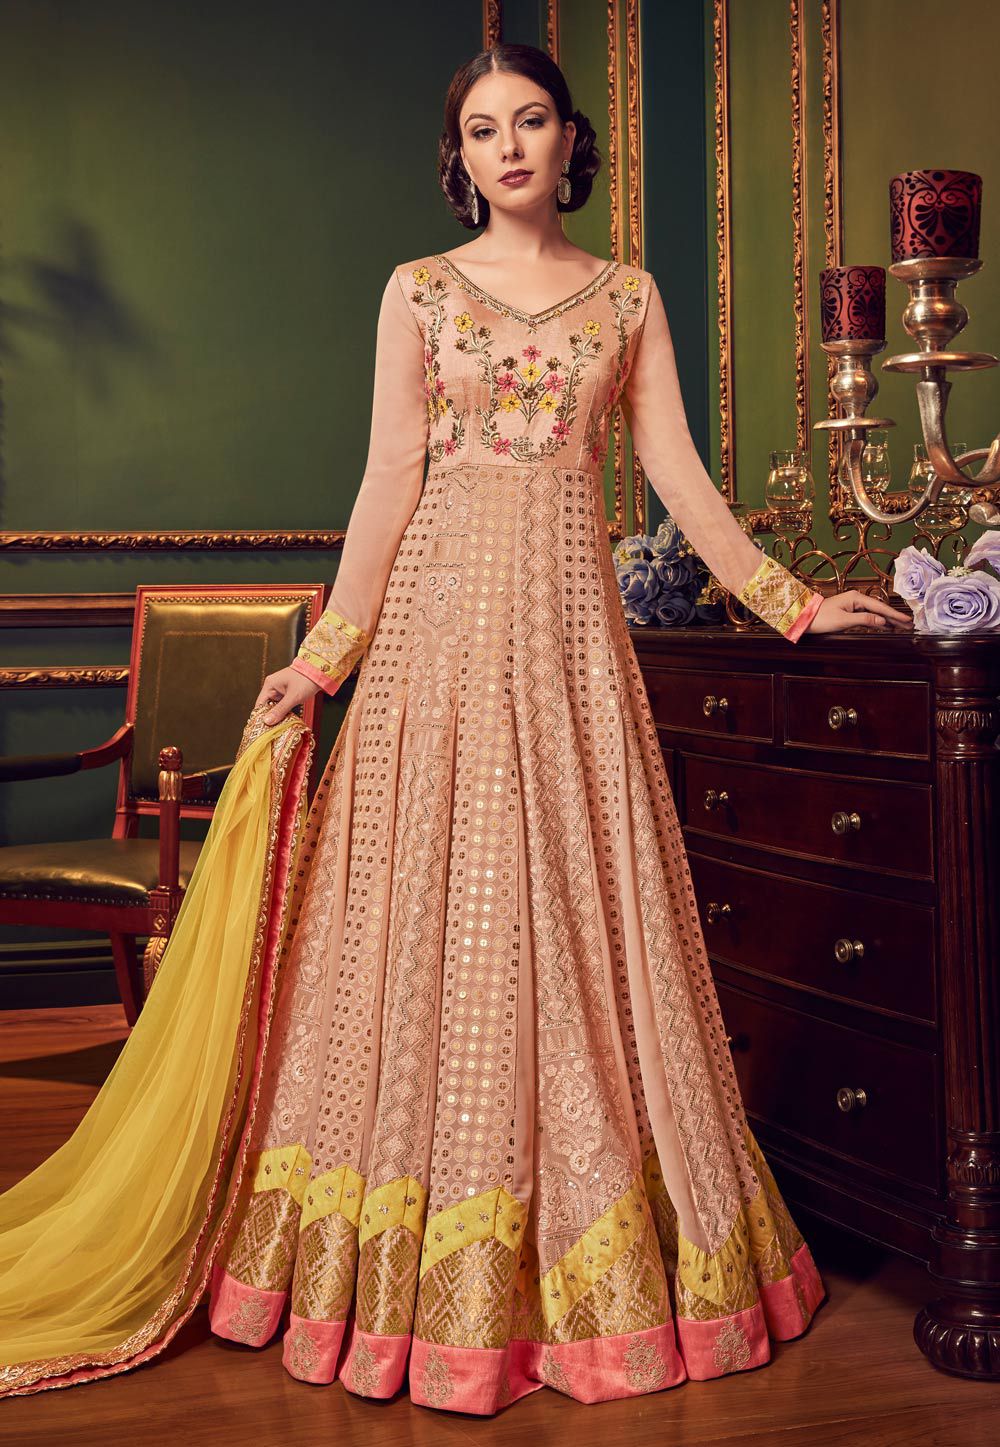 200+ Latest and Best Indian Wedding Dresses for Women and Girls of All Ages